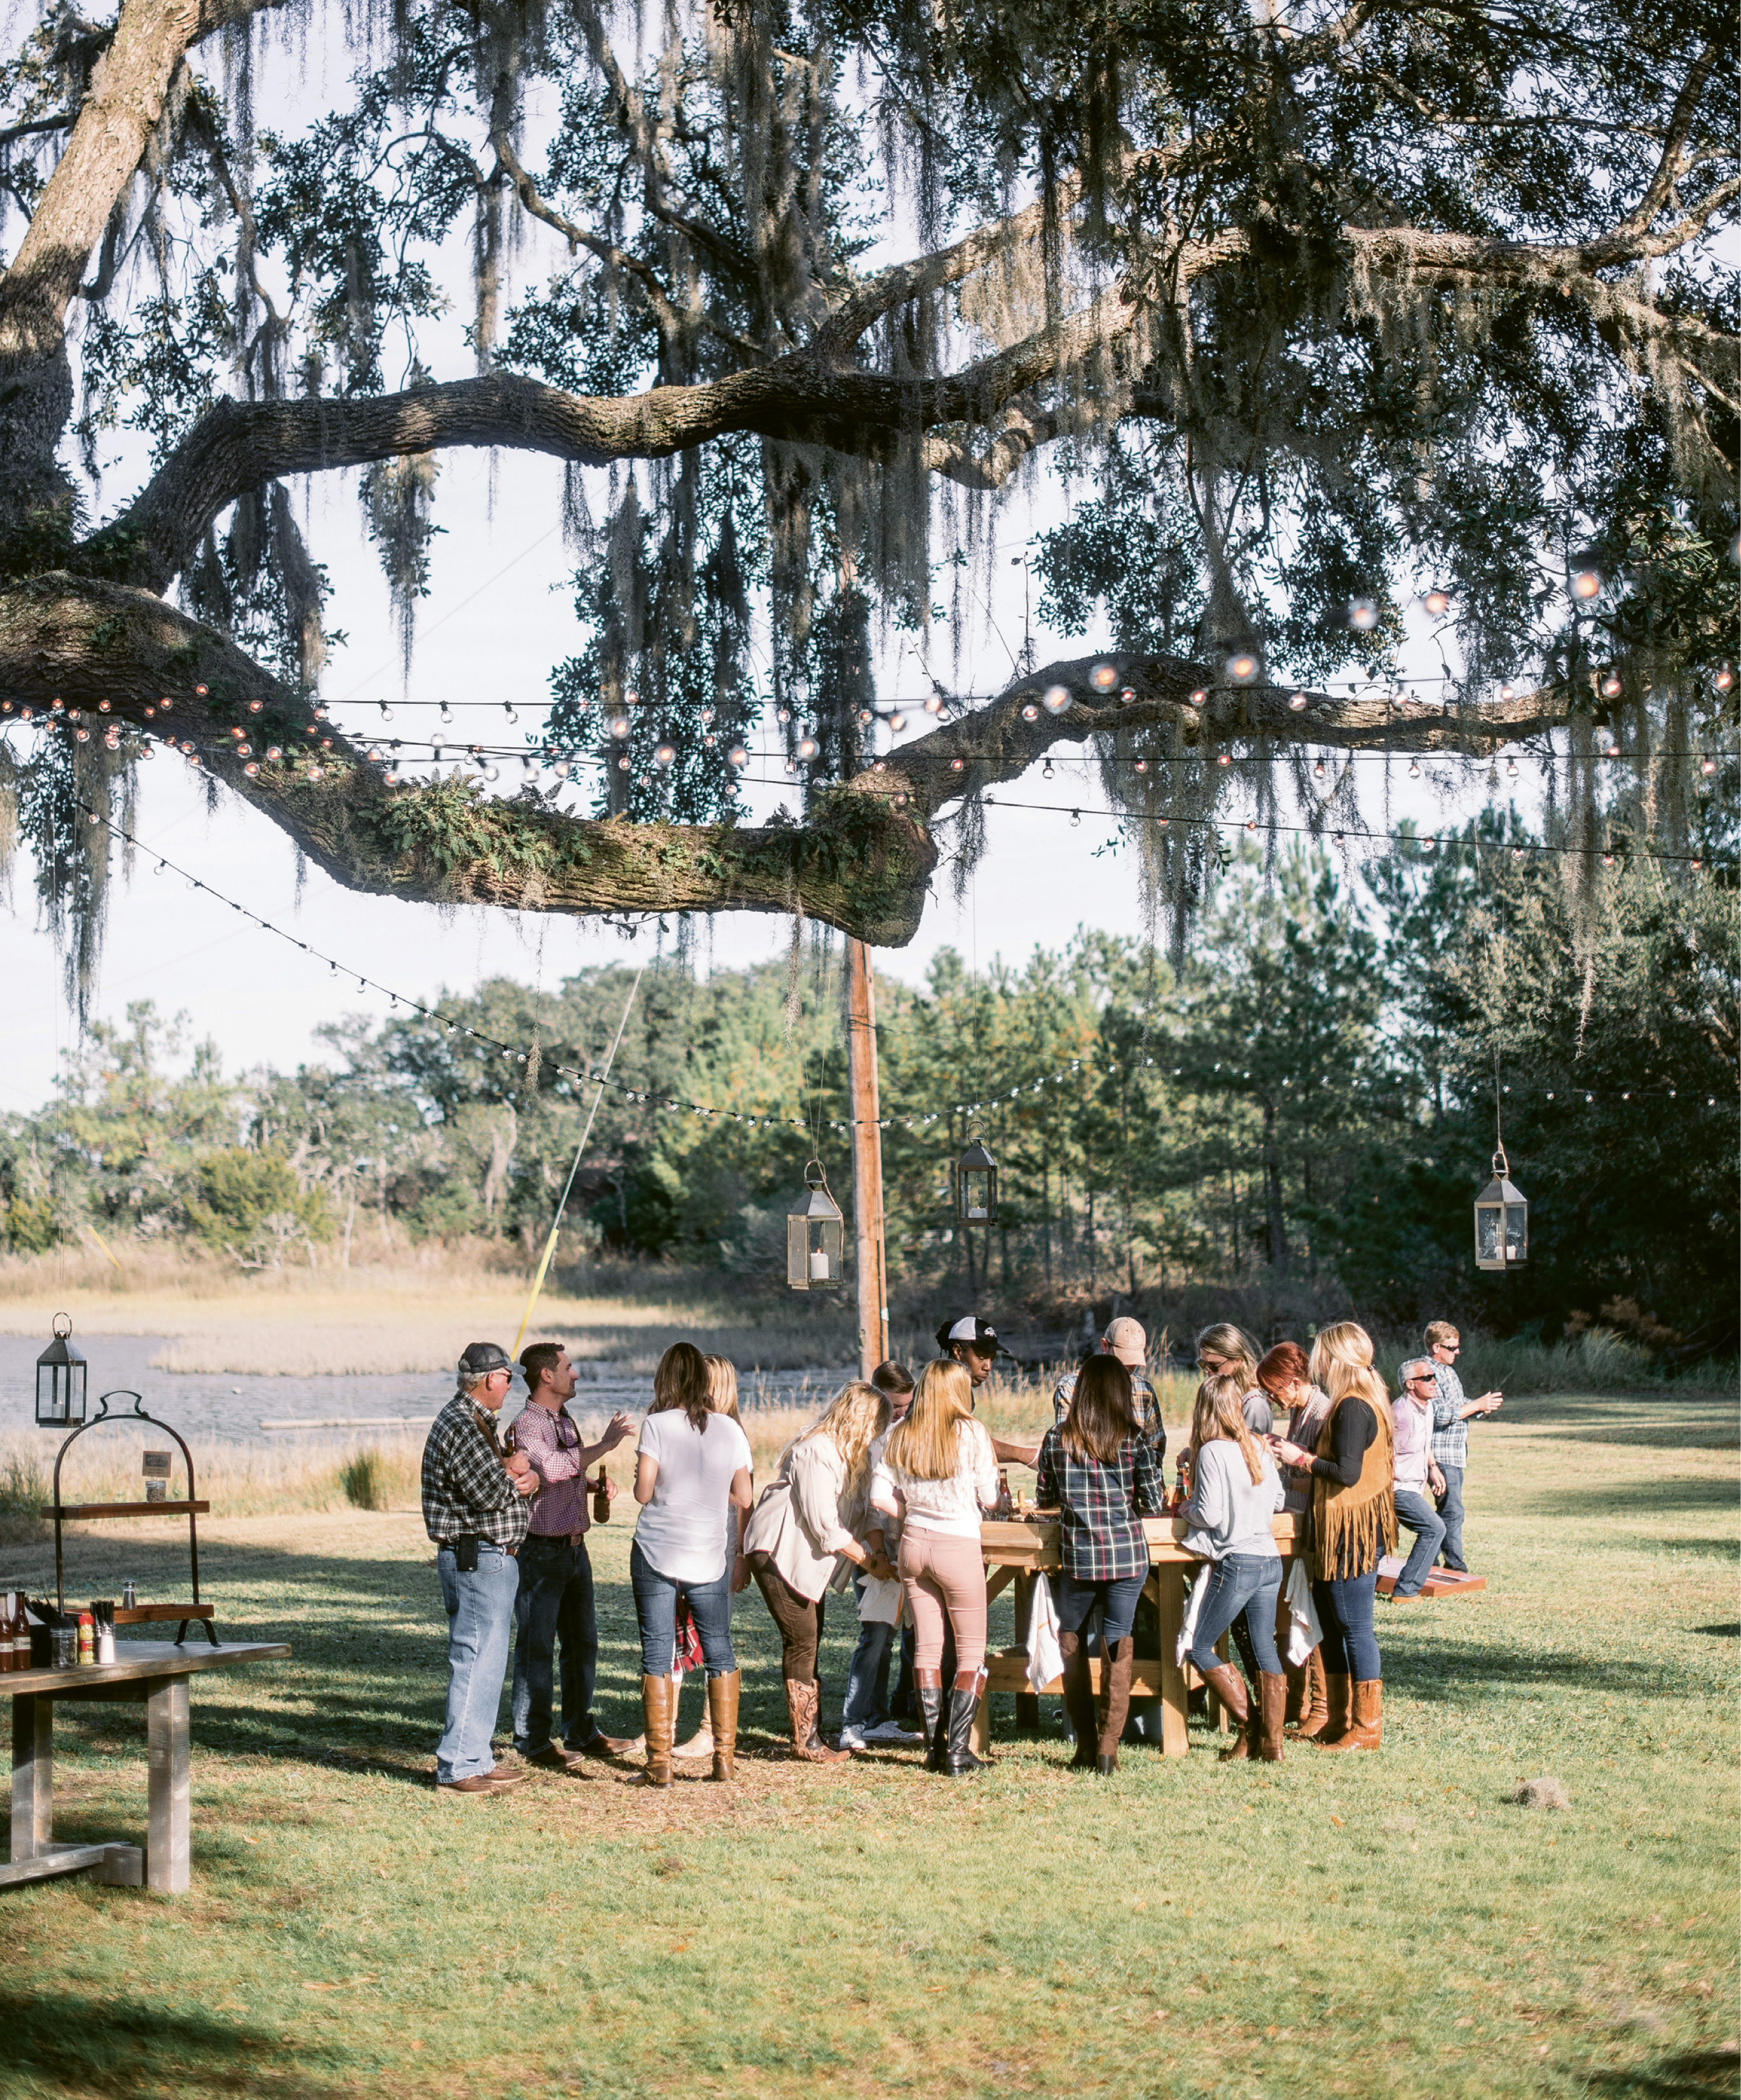 Work the Space: The oyster table was placed in the shade of a grand live oak. With Spanish moss and resurrection ferns clinging to the branches above, the decor could be rustic and minimal.